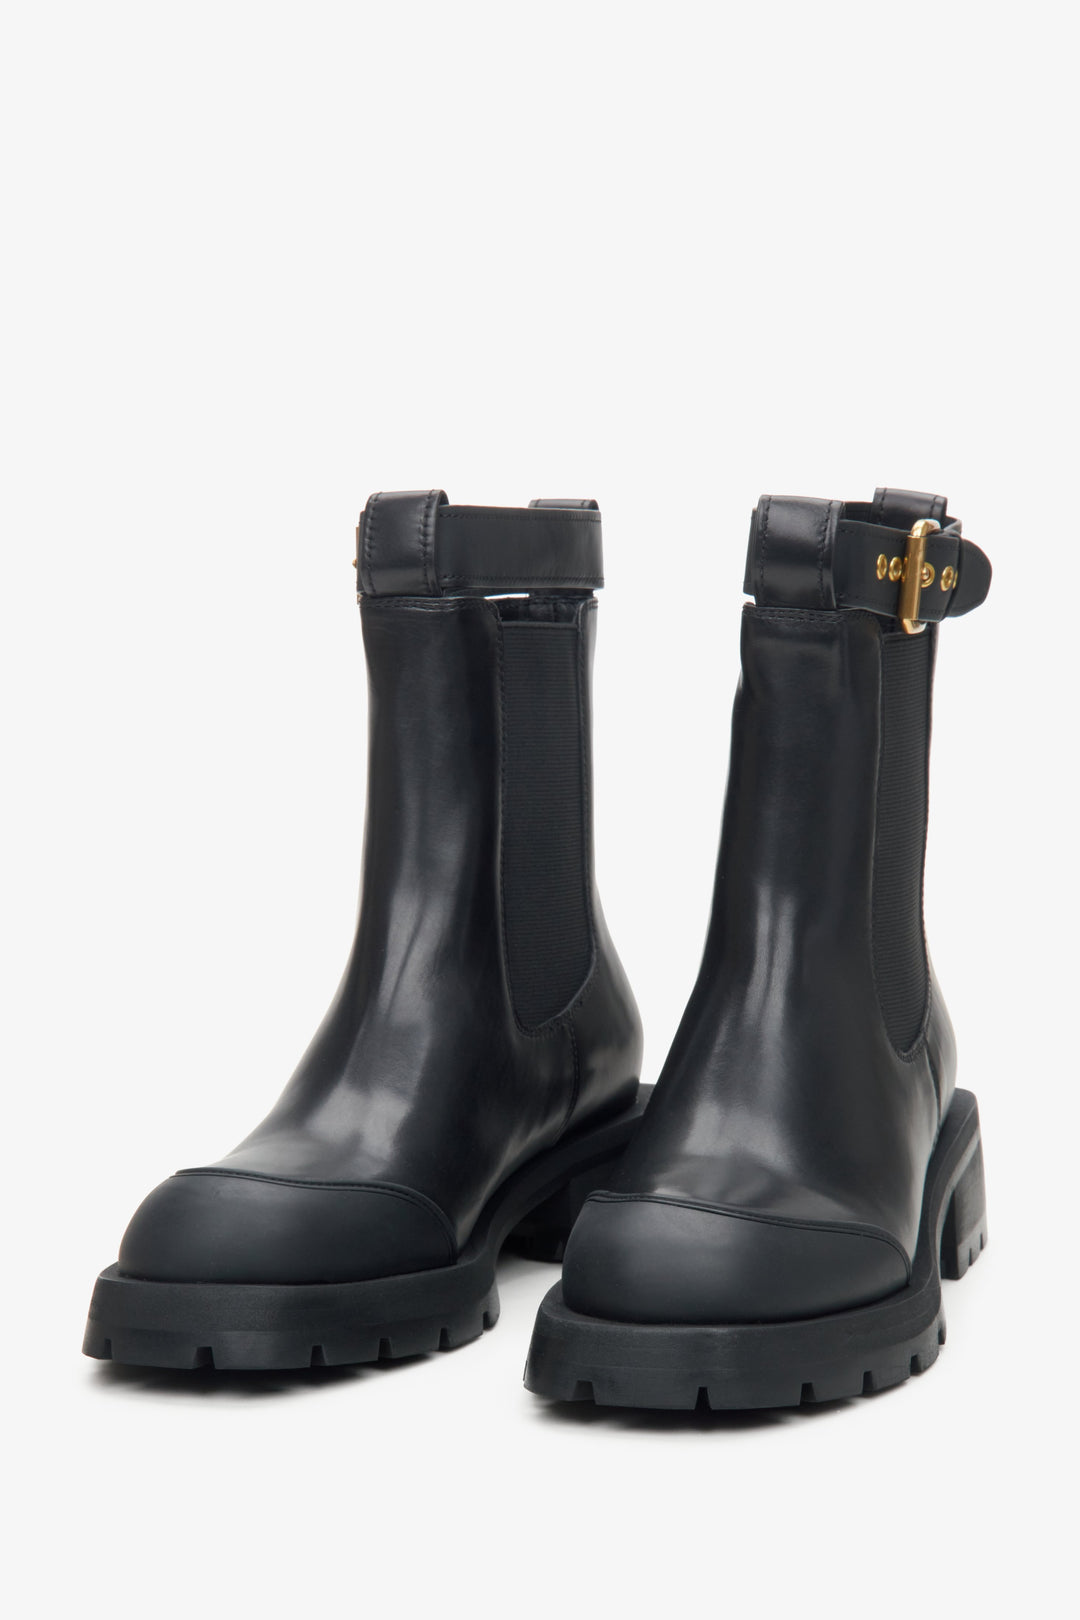 Black Chelsea boots made of genuine leather - presentation on a tip of the toe.